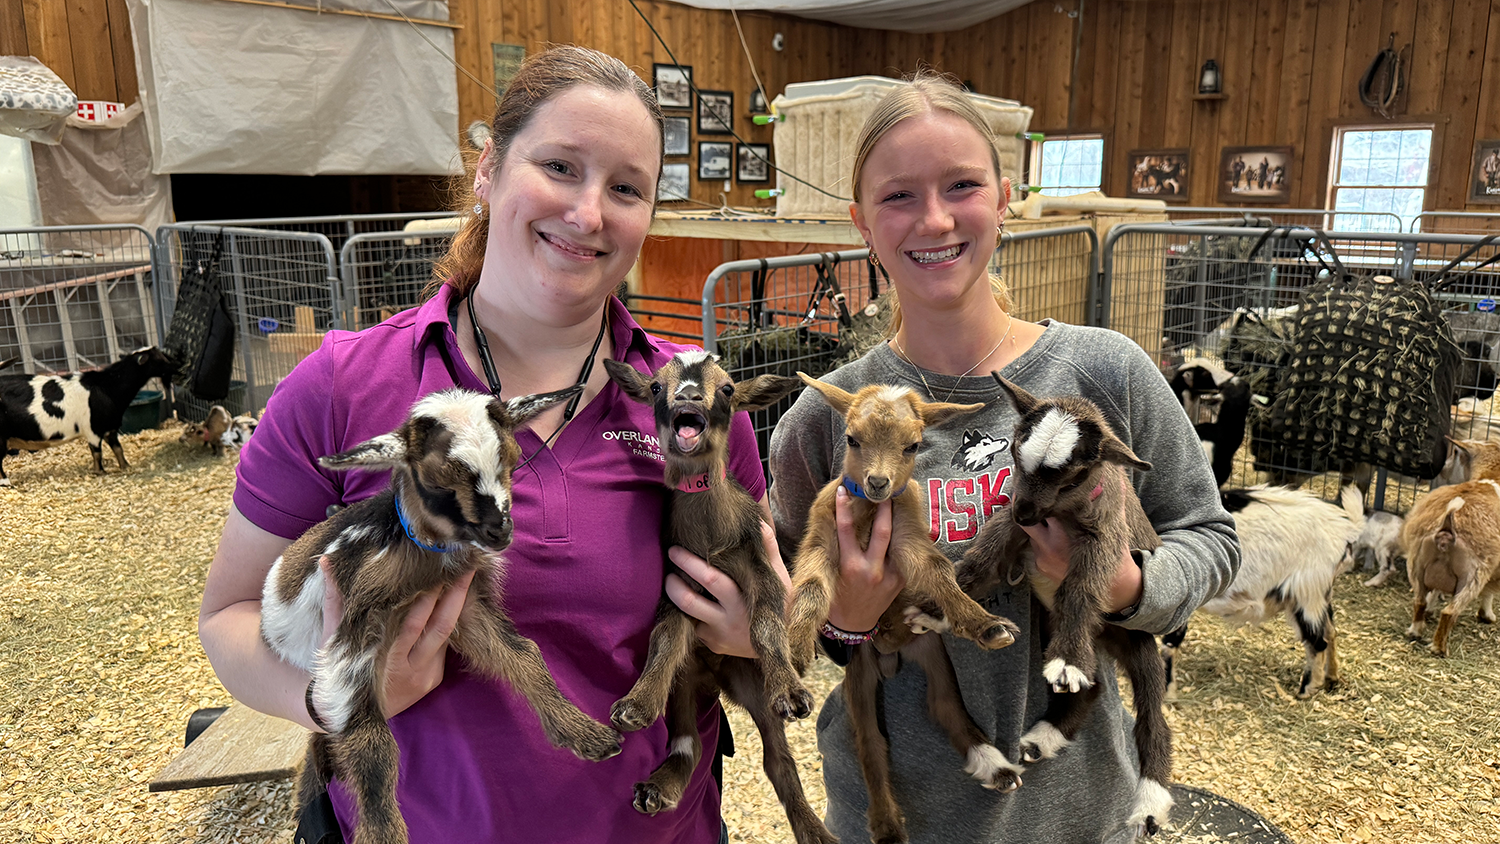 Two Deanna Rose Children's Farmstead staff members pose for a photo with baby goats.